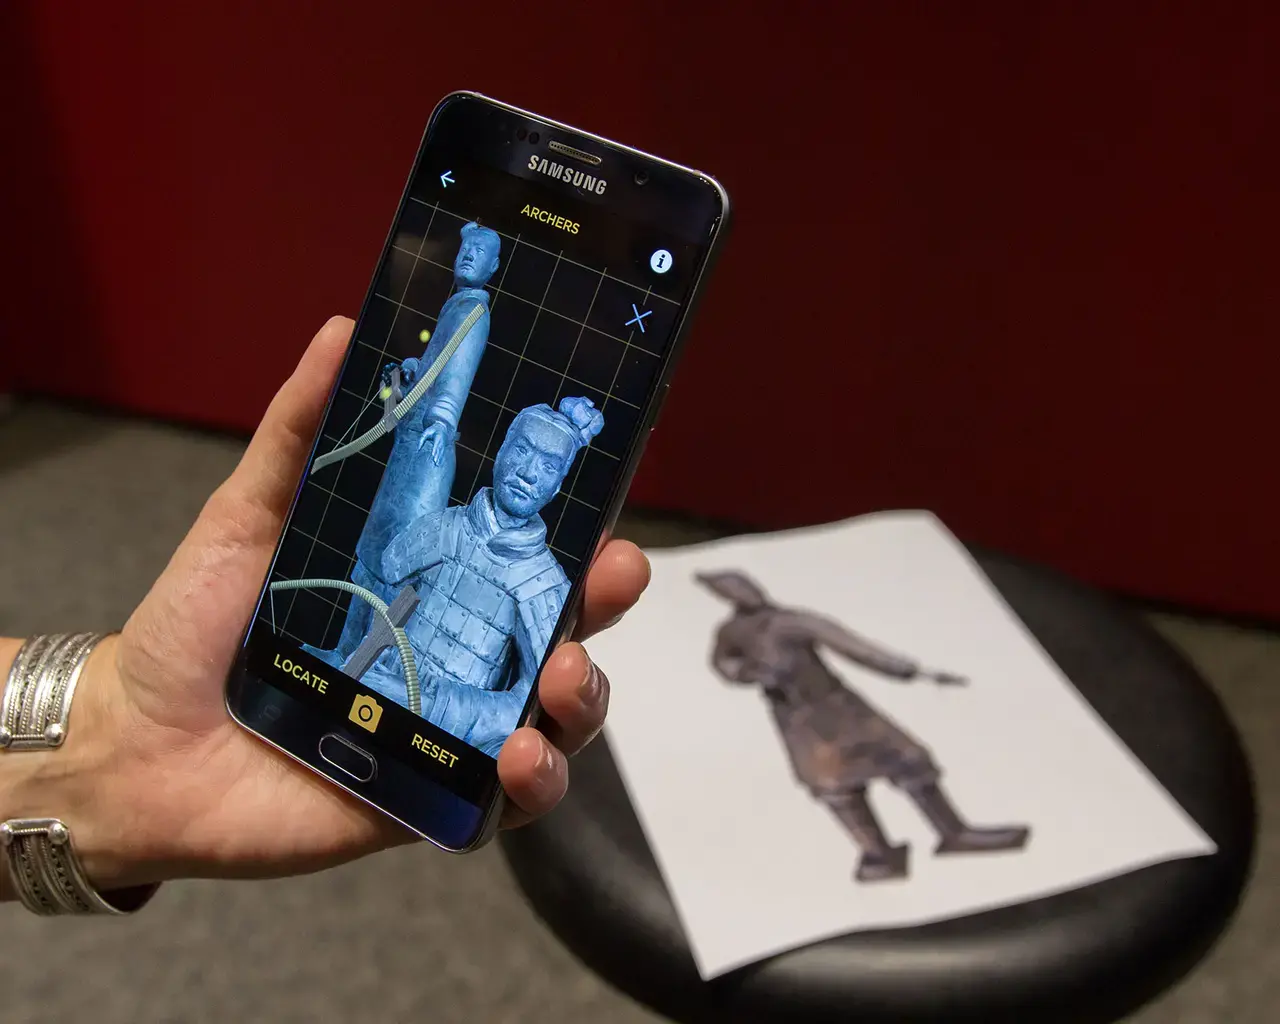 Terracotta Warriors of the First Emperor, mobile app with augmented reality. Photo by Lendl Tellington, courtesy of The Franklin Institute.